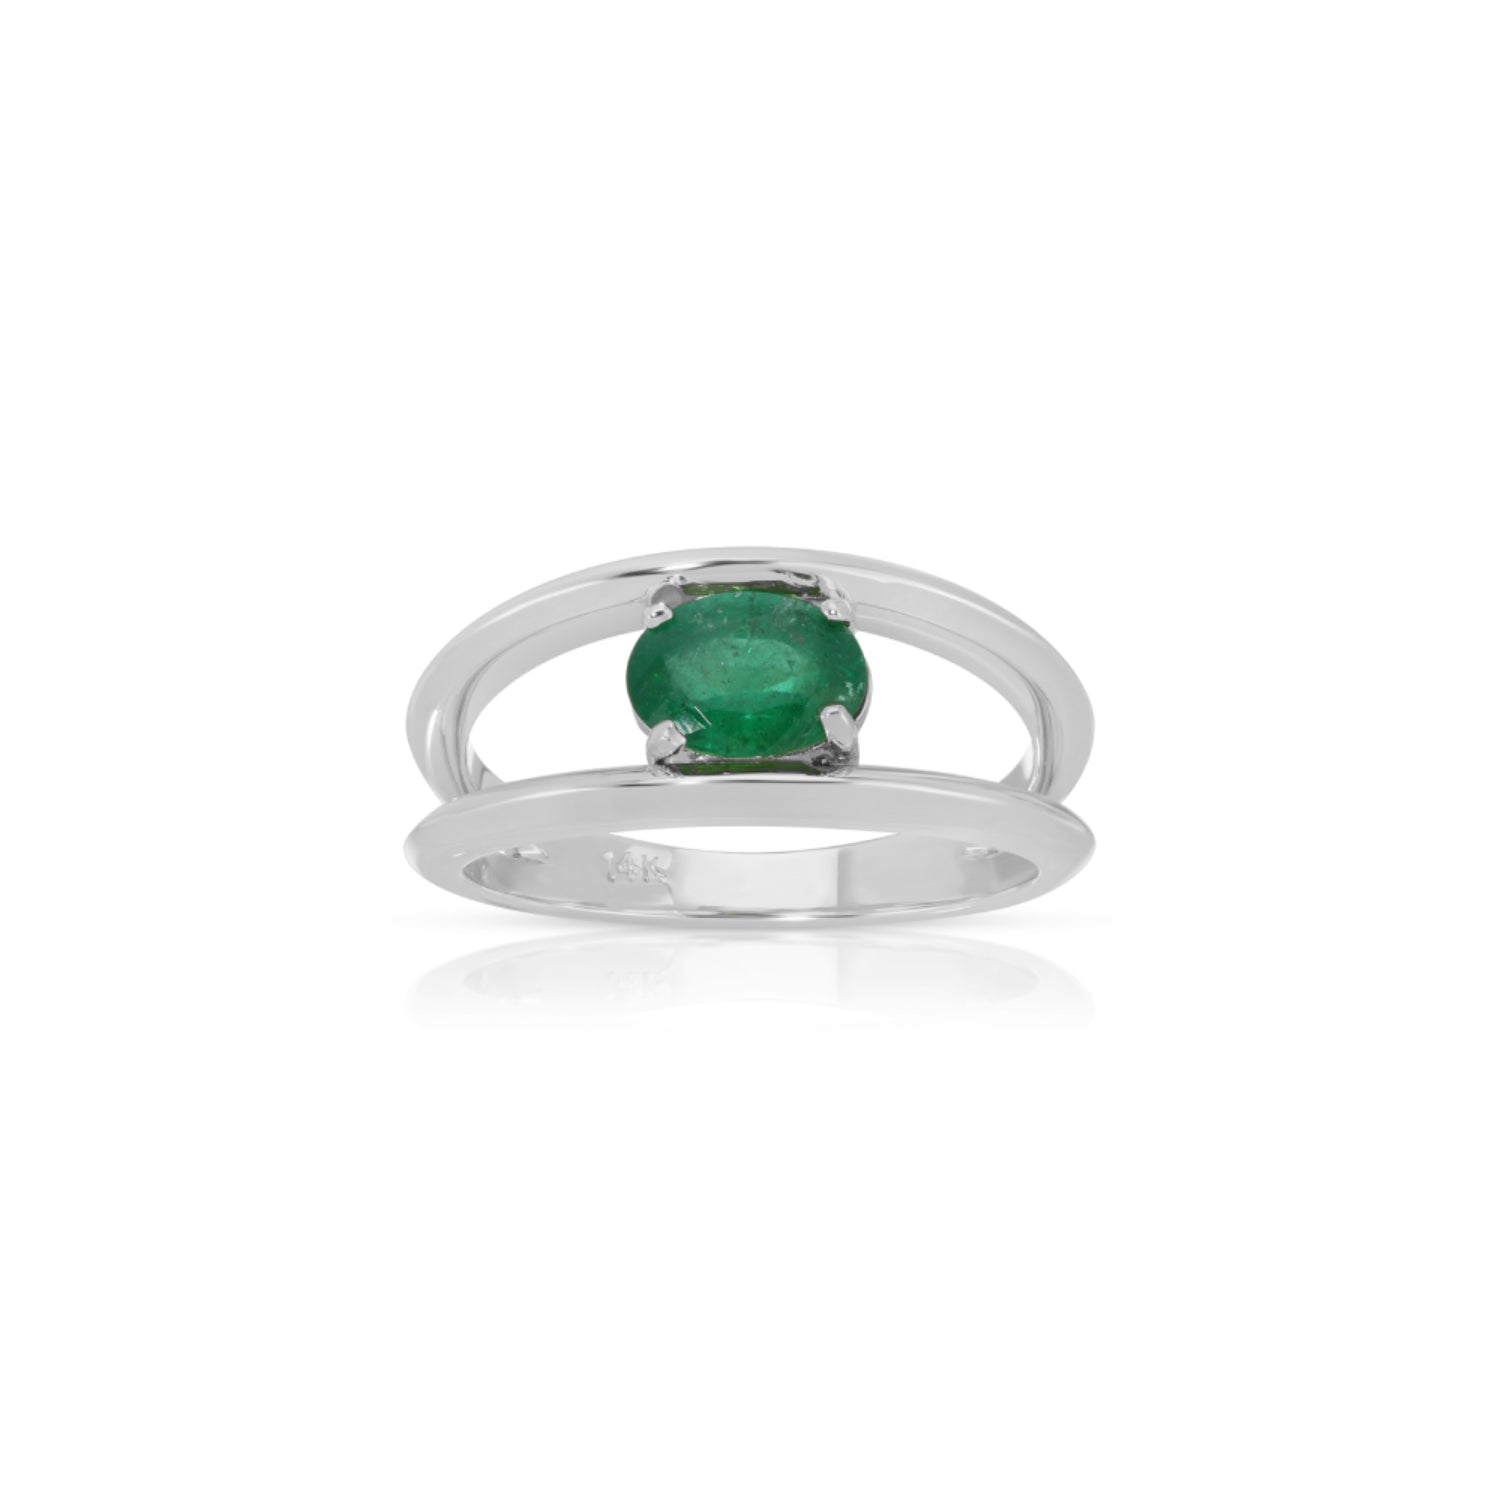 GREEN EMERALD OVAL SHAPE RING - 6.56 CT -